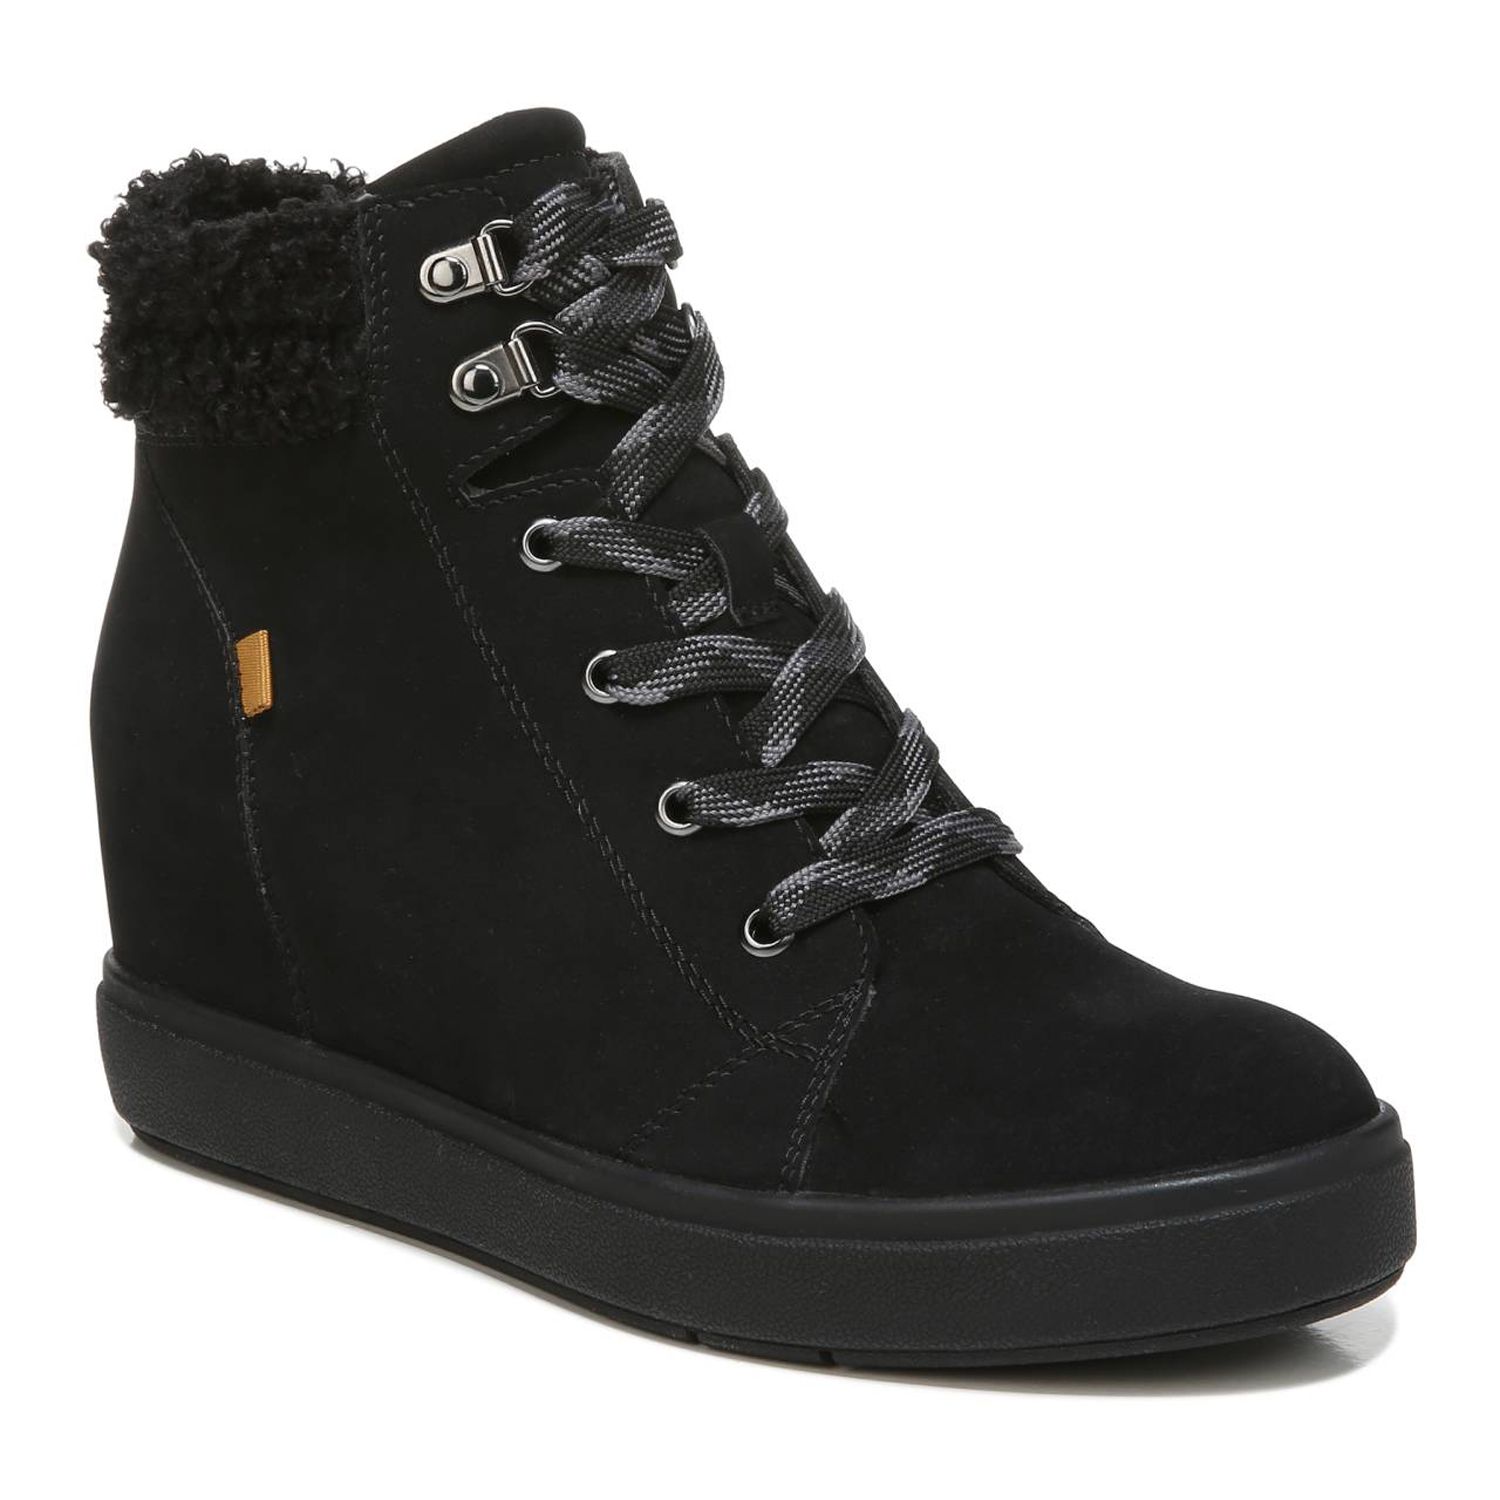 Image for Dr. Scholl's Madison Hike Women's Wedge Sneaker Boots at Kohl's.